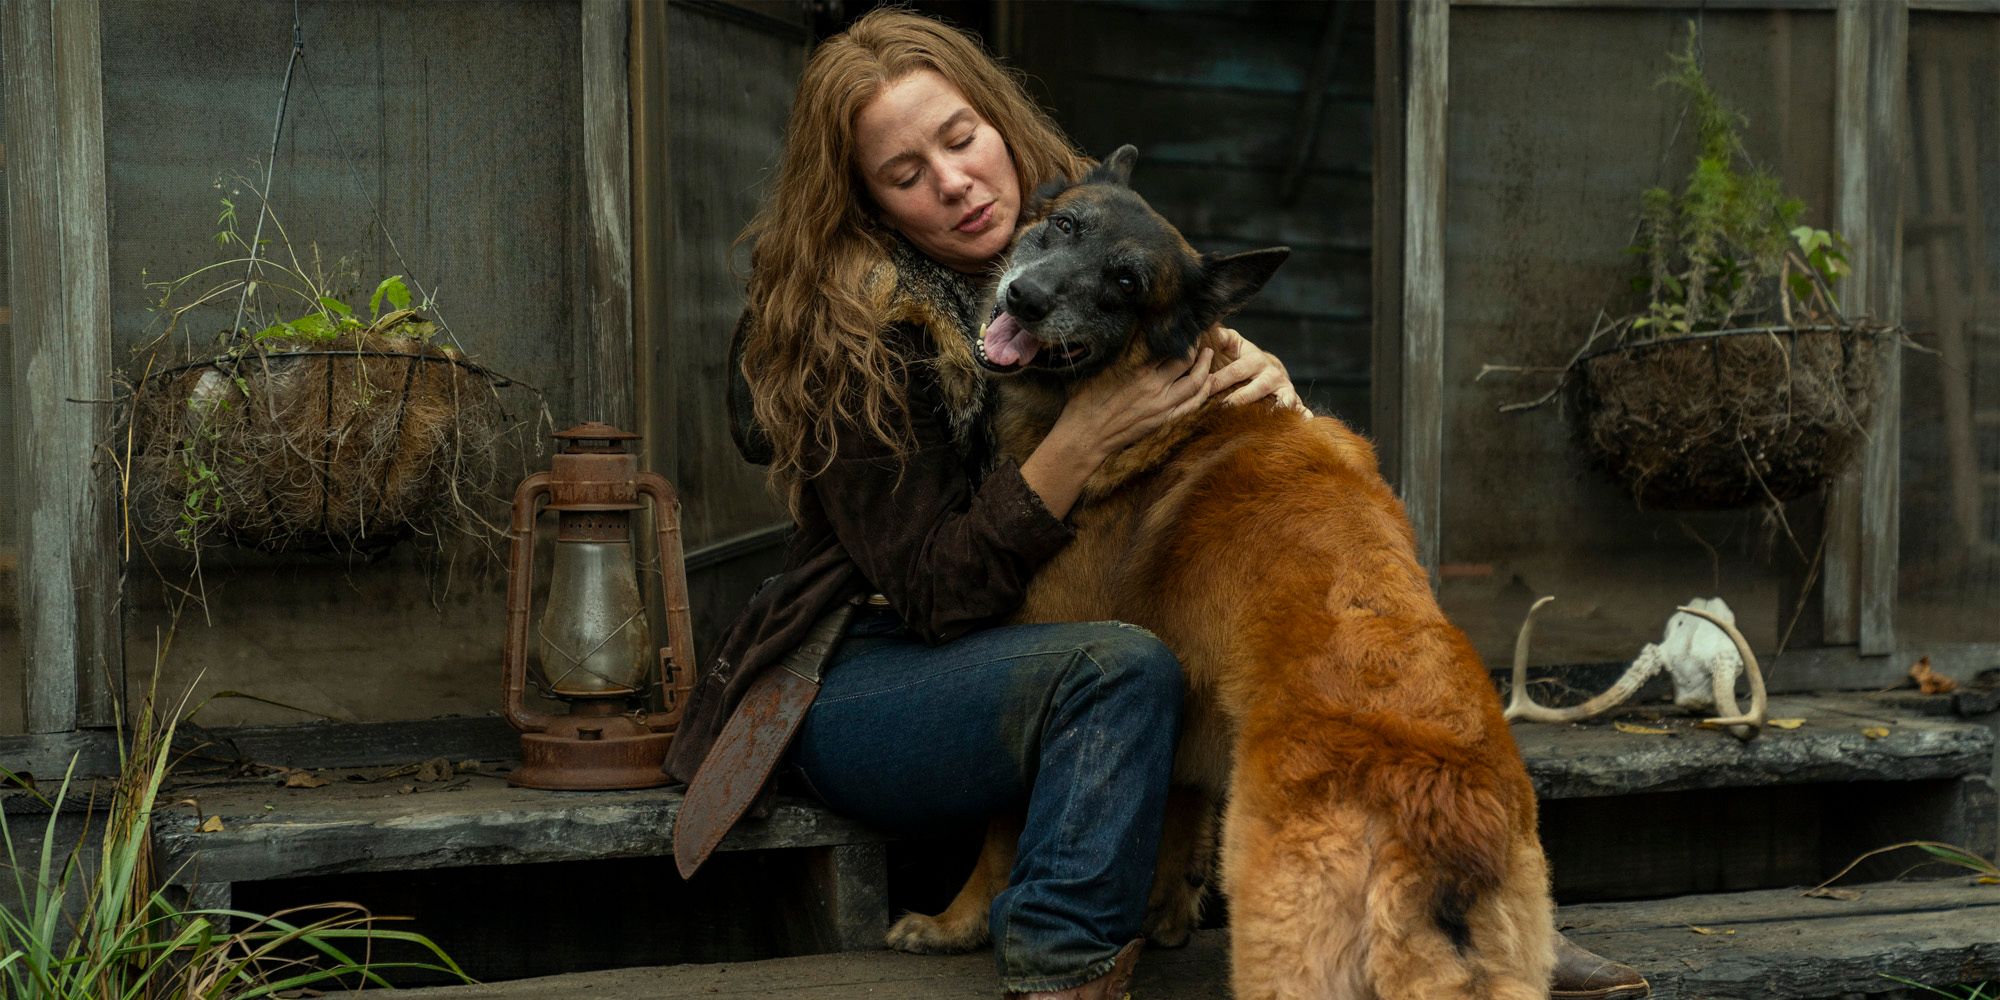 Leah being greeted by Dog on her front porch in The Walking Dead